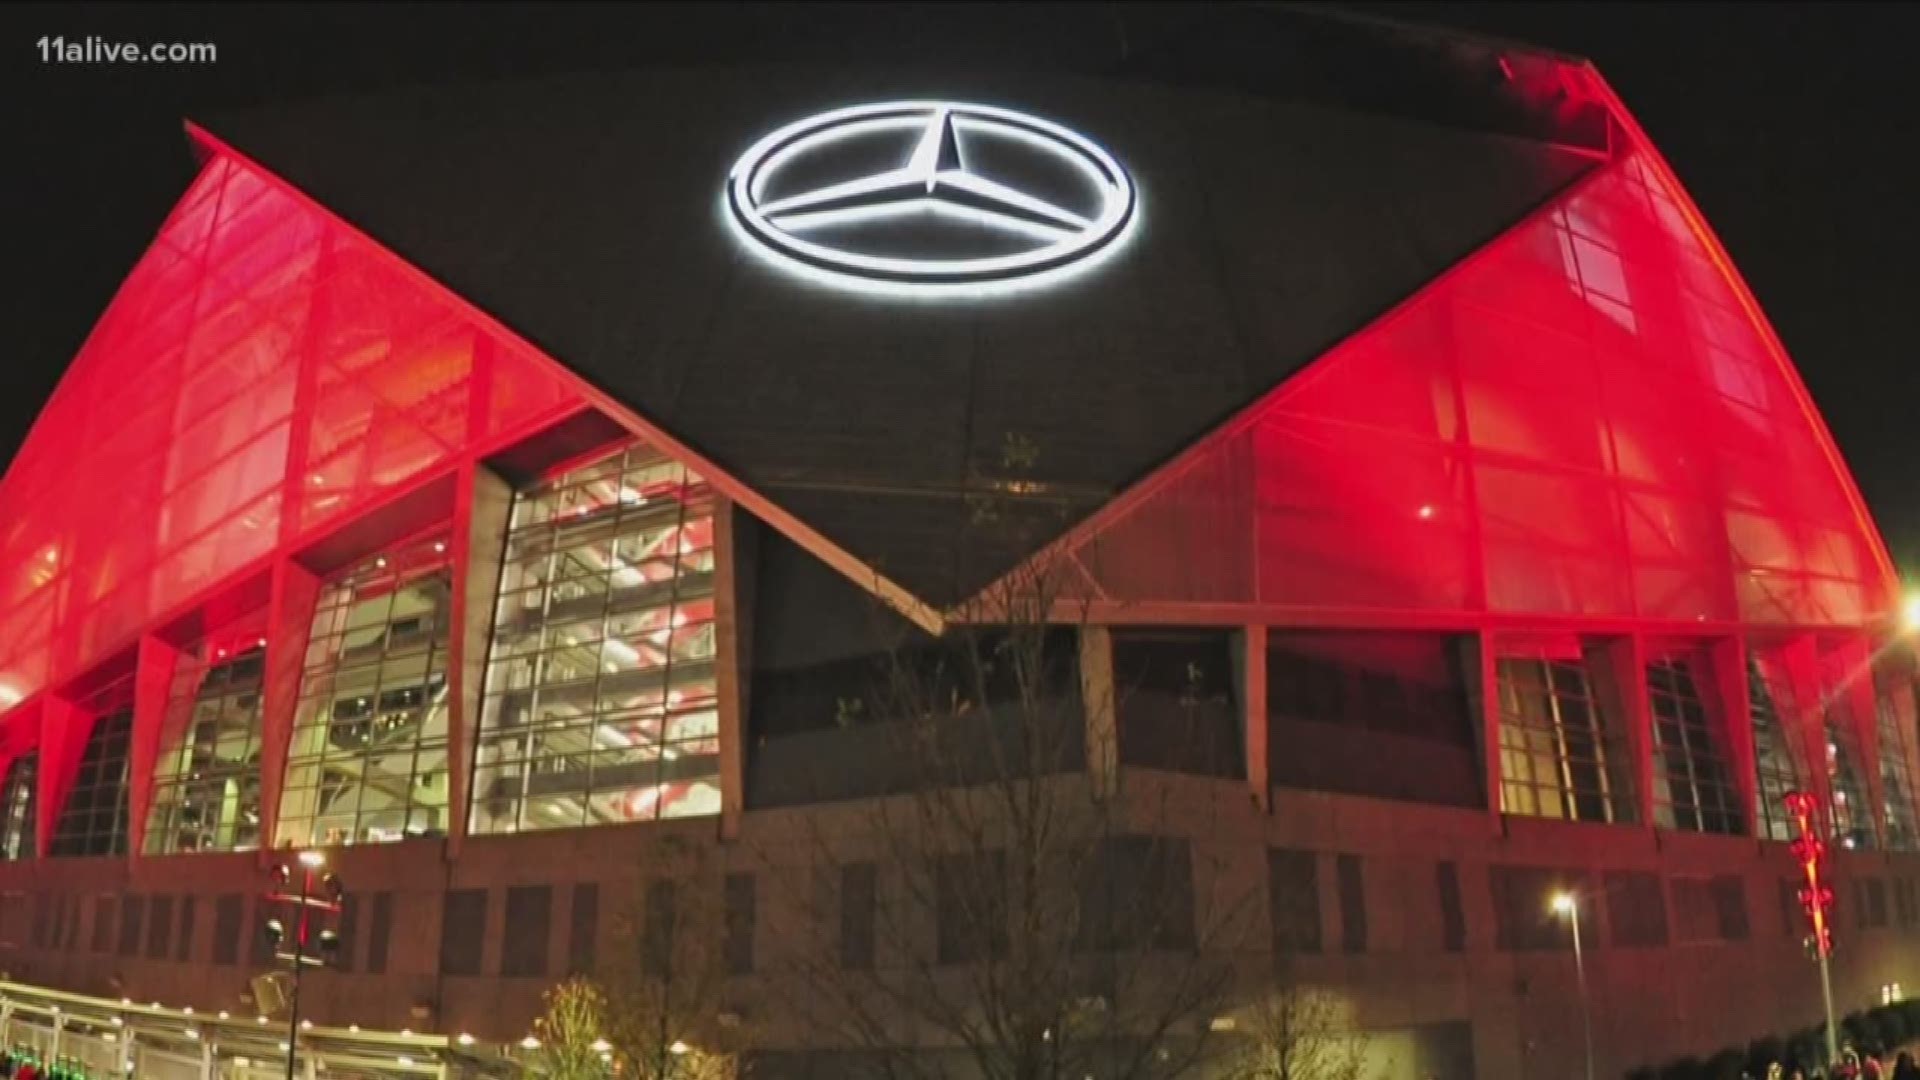 You can expect to see some visible security increases in the coming weeks near Mercedes-Benz Stadium.